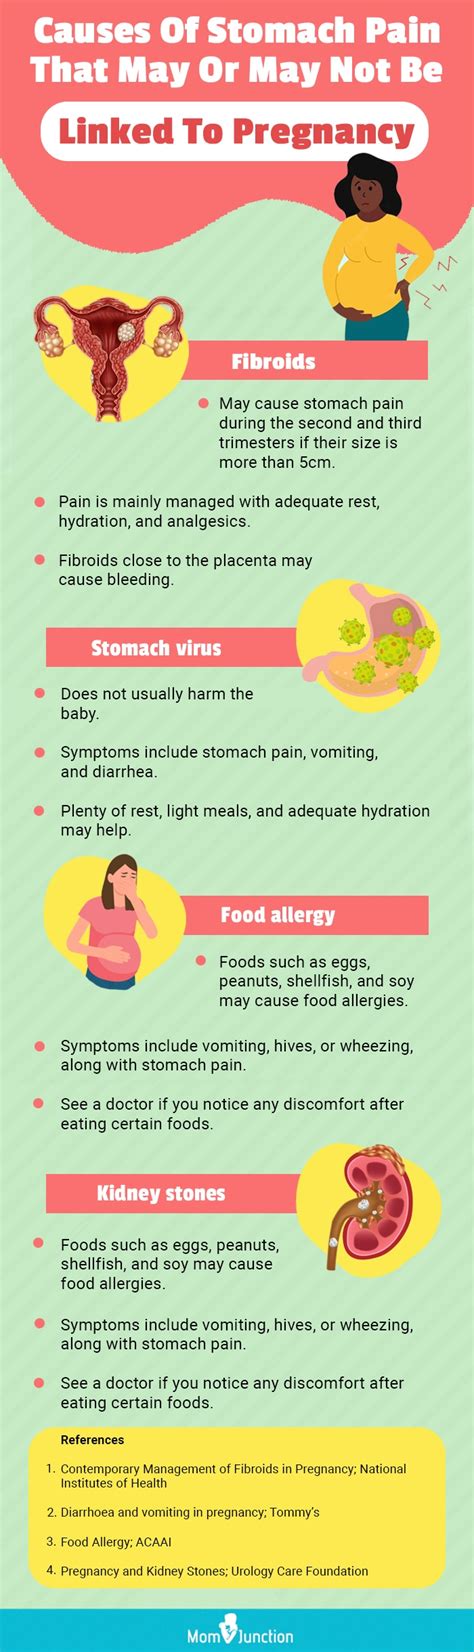 14 Causes Of Abdominal Stomach Pain During Pregnancy